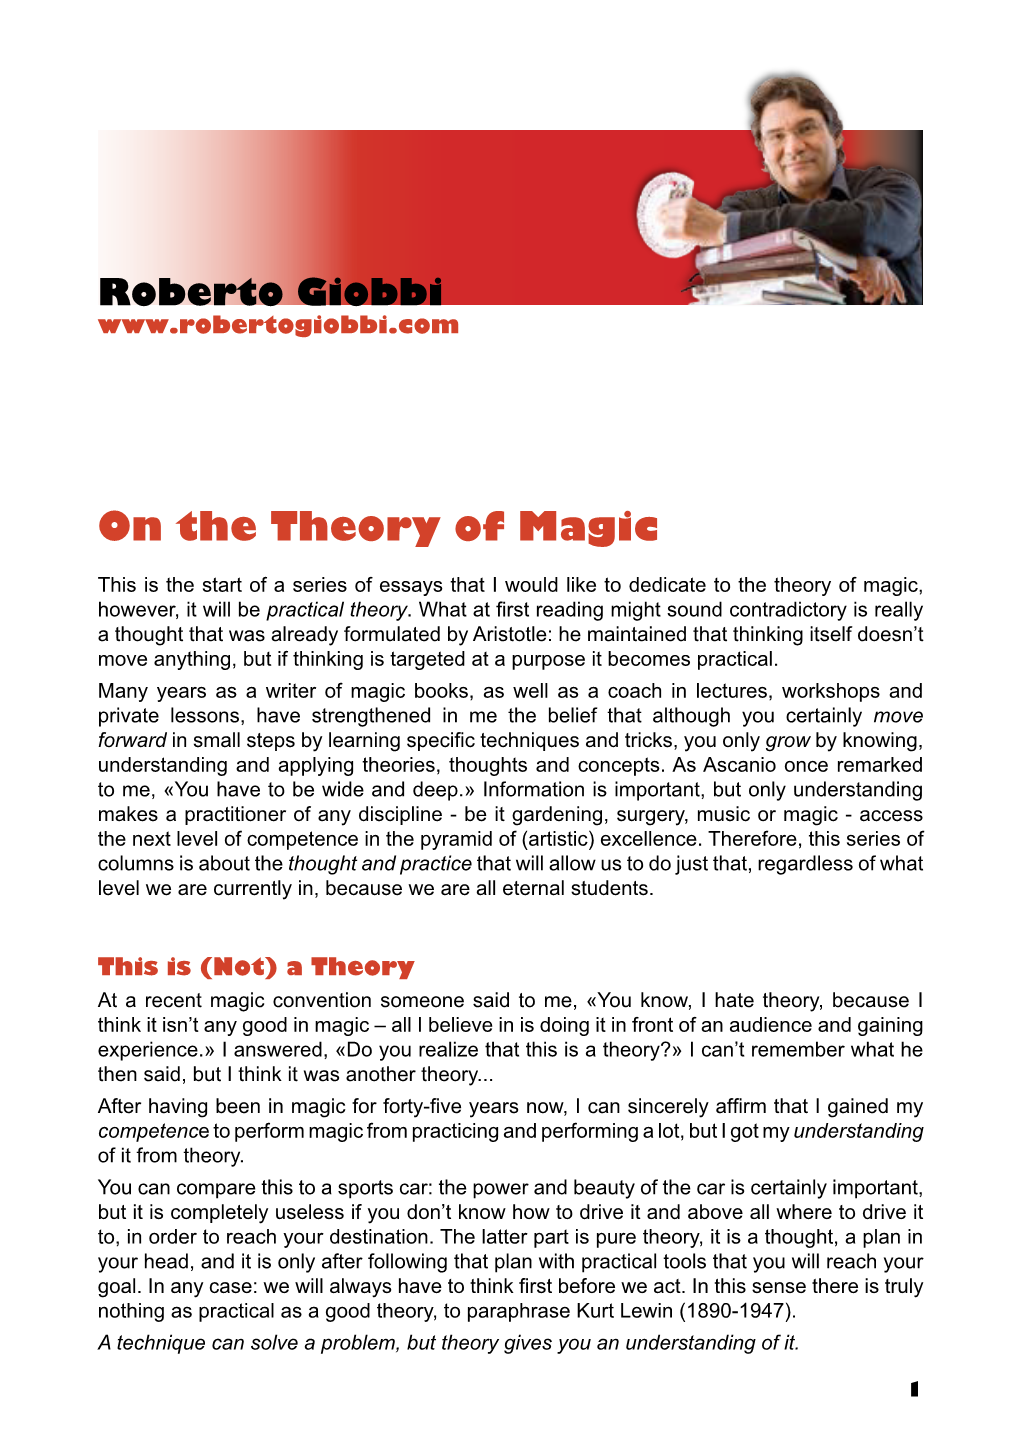 On the Theory of Magic